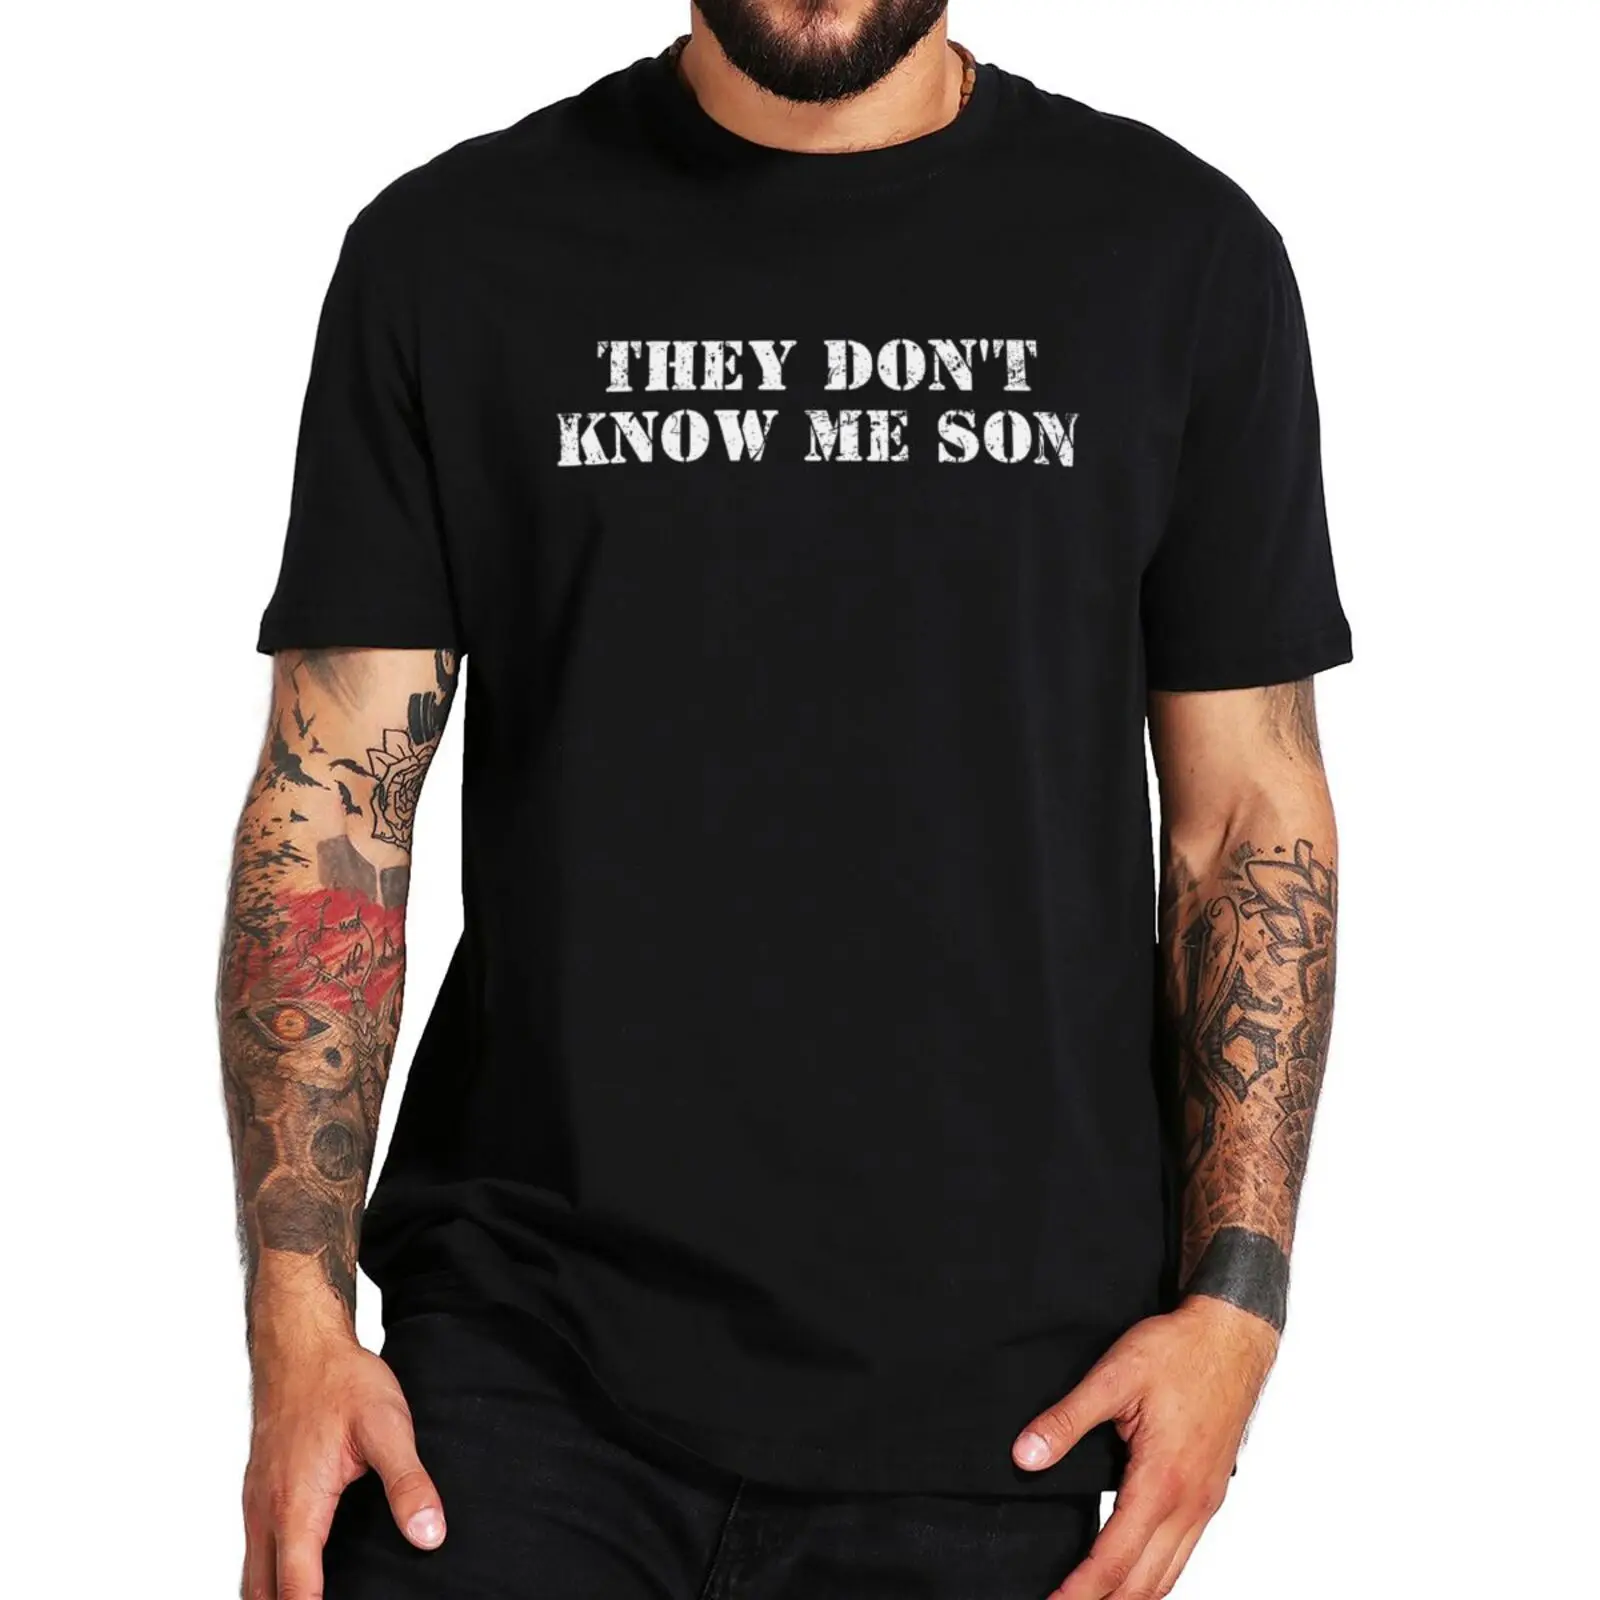 

They Dont Know Me Son T Shirt Gym Quotes Sports Gym Fans Short Sleeve 100% Cotton Unisex Summer O-neck T-shirts EU Size